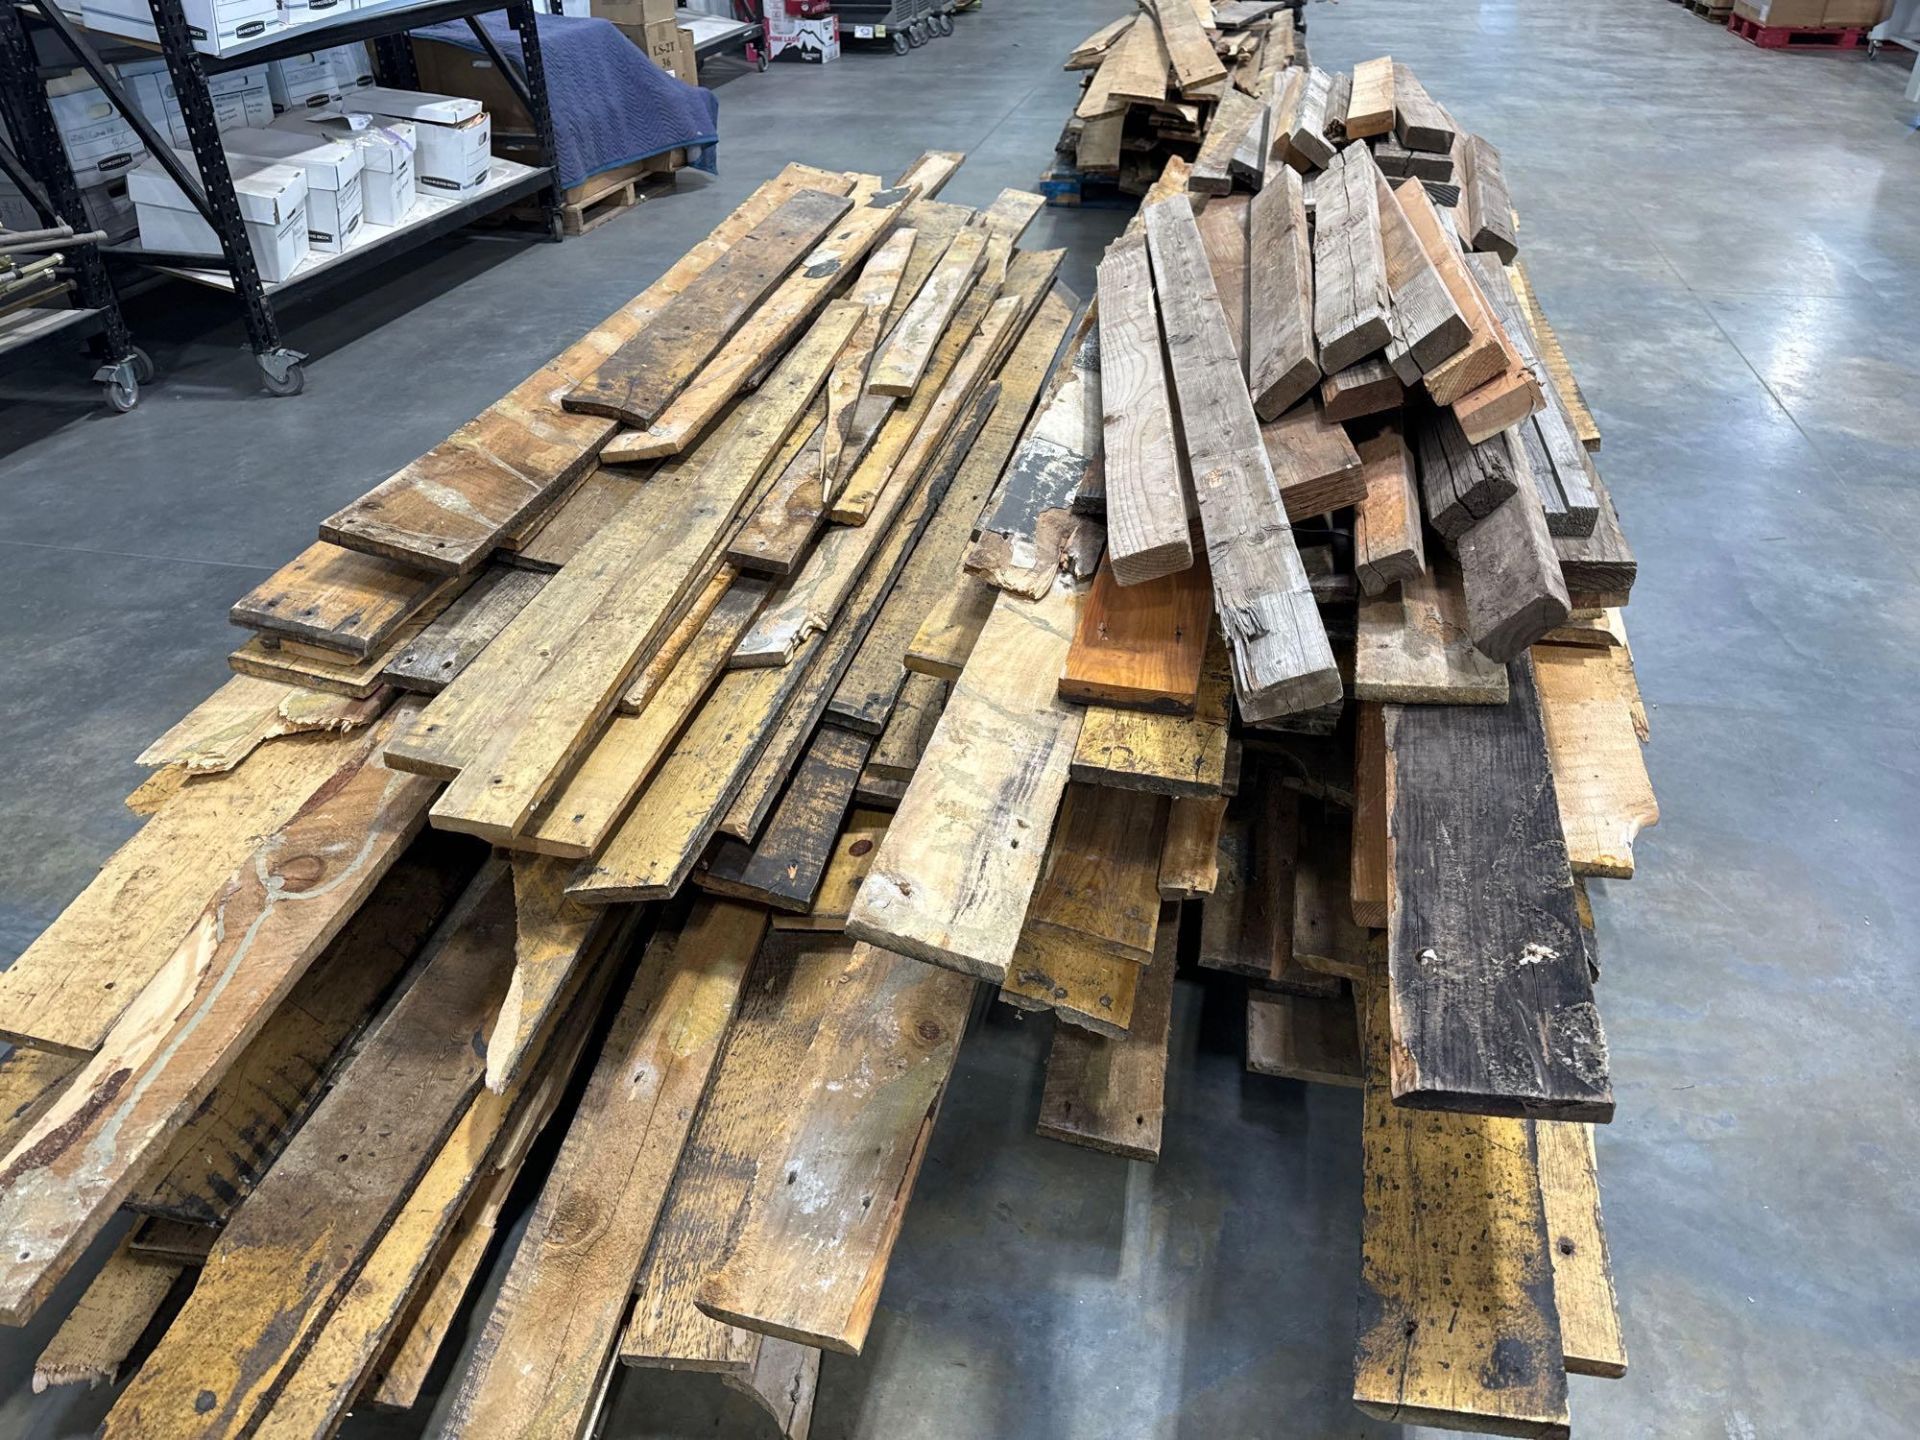 Two stacks of Reclaimed flooring from claim jumper steak house - Image 4 of 5